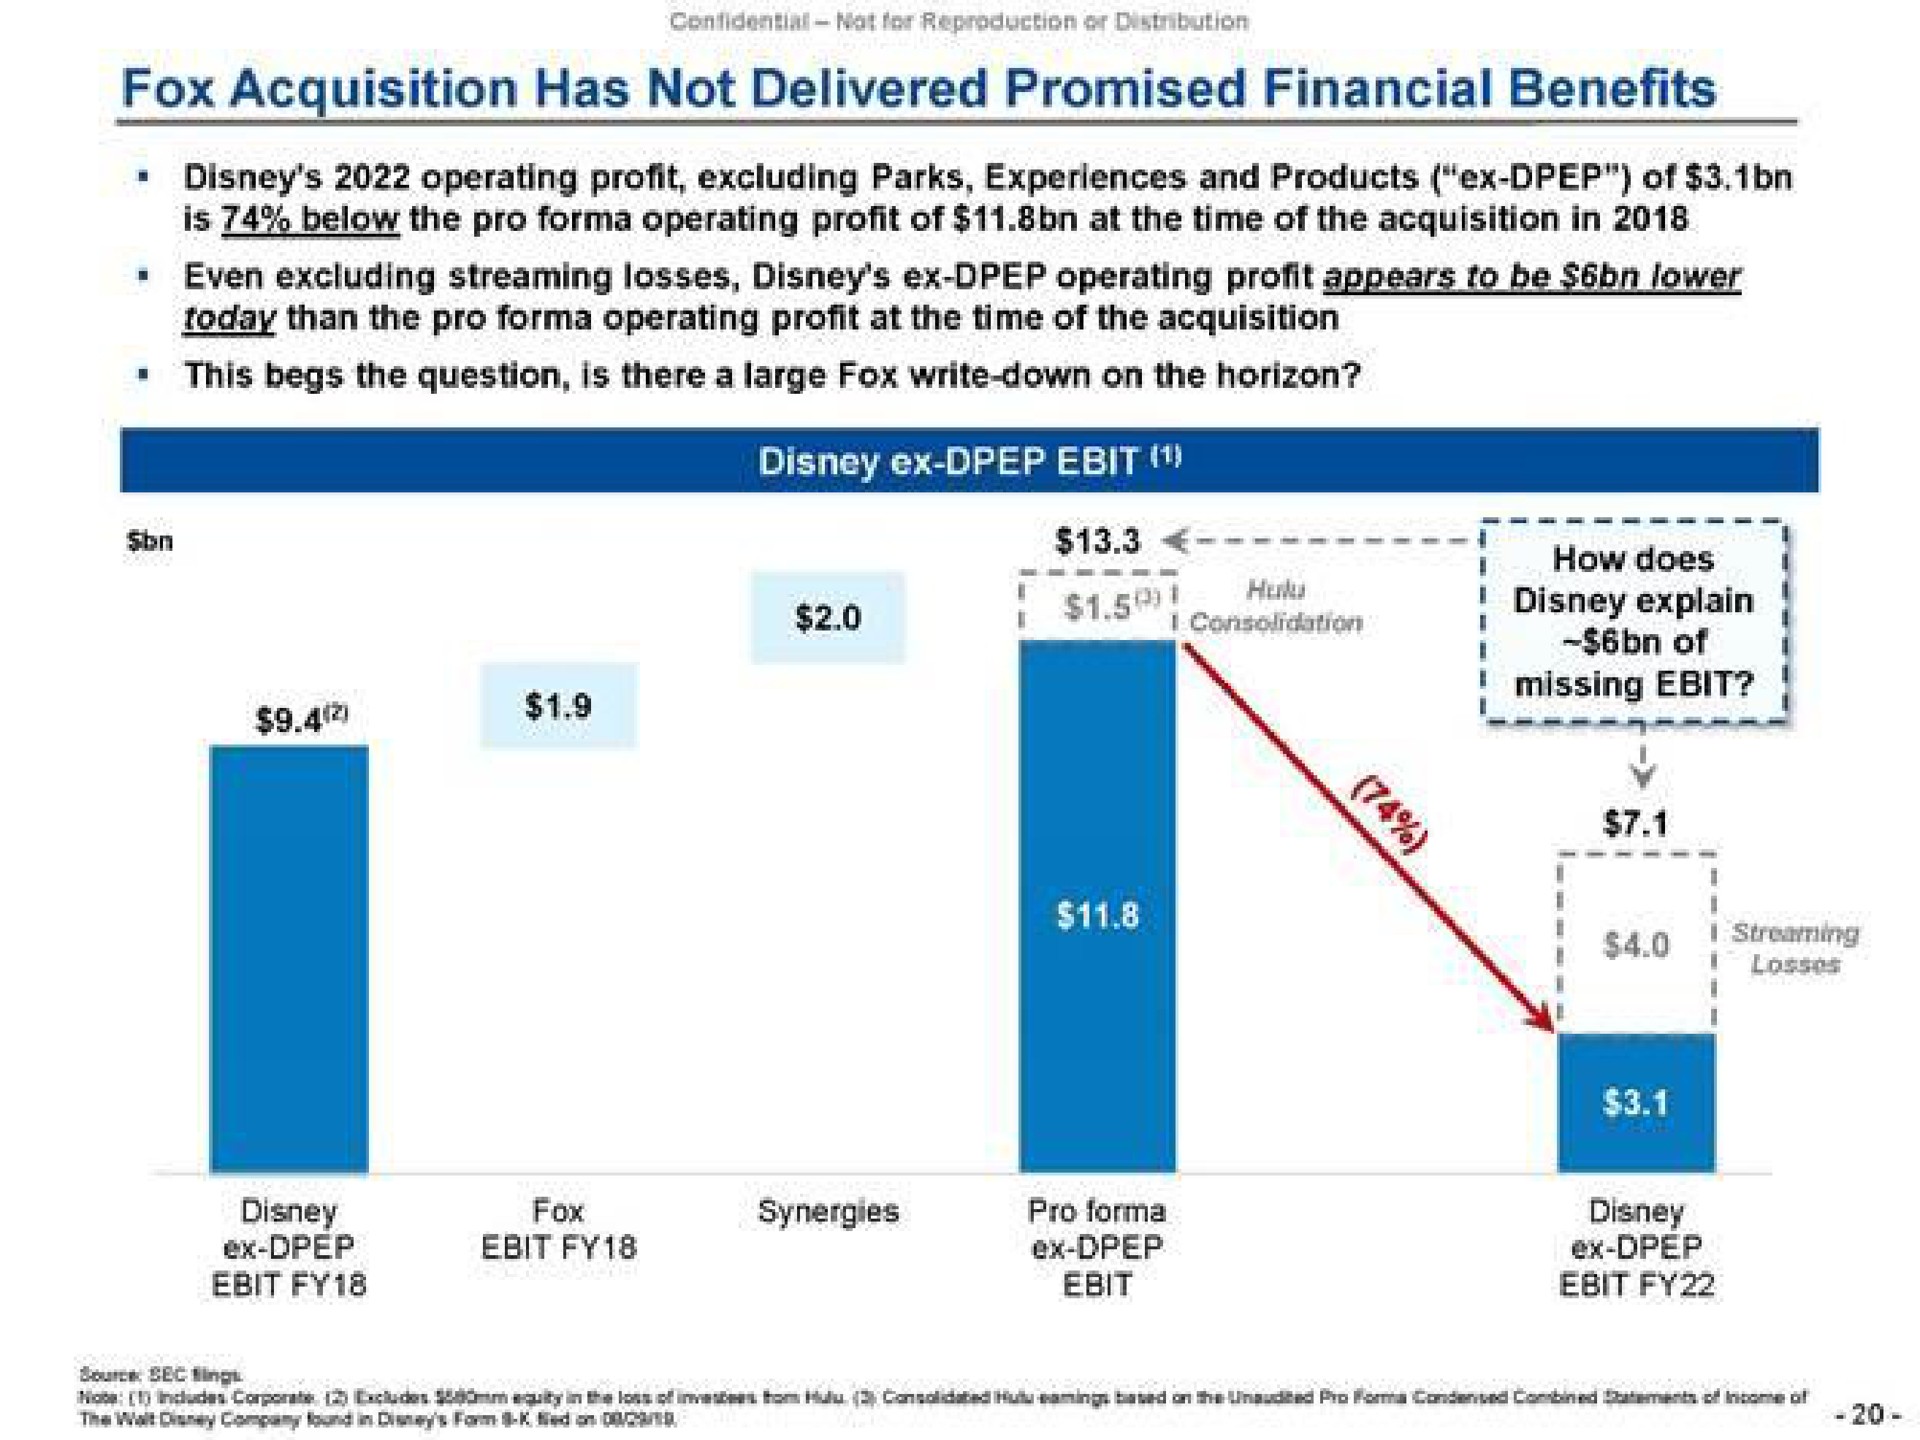 fox acquisition has not delivered promised financial benefits a operating profit excluding parks experiences and products of is below the pro operating profit of at the time of the in even excluding streaming losses operating profit this begs the question is there a large fox write down on the horizon how does fox synergies pro | Trian Partners